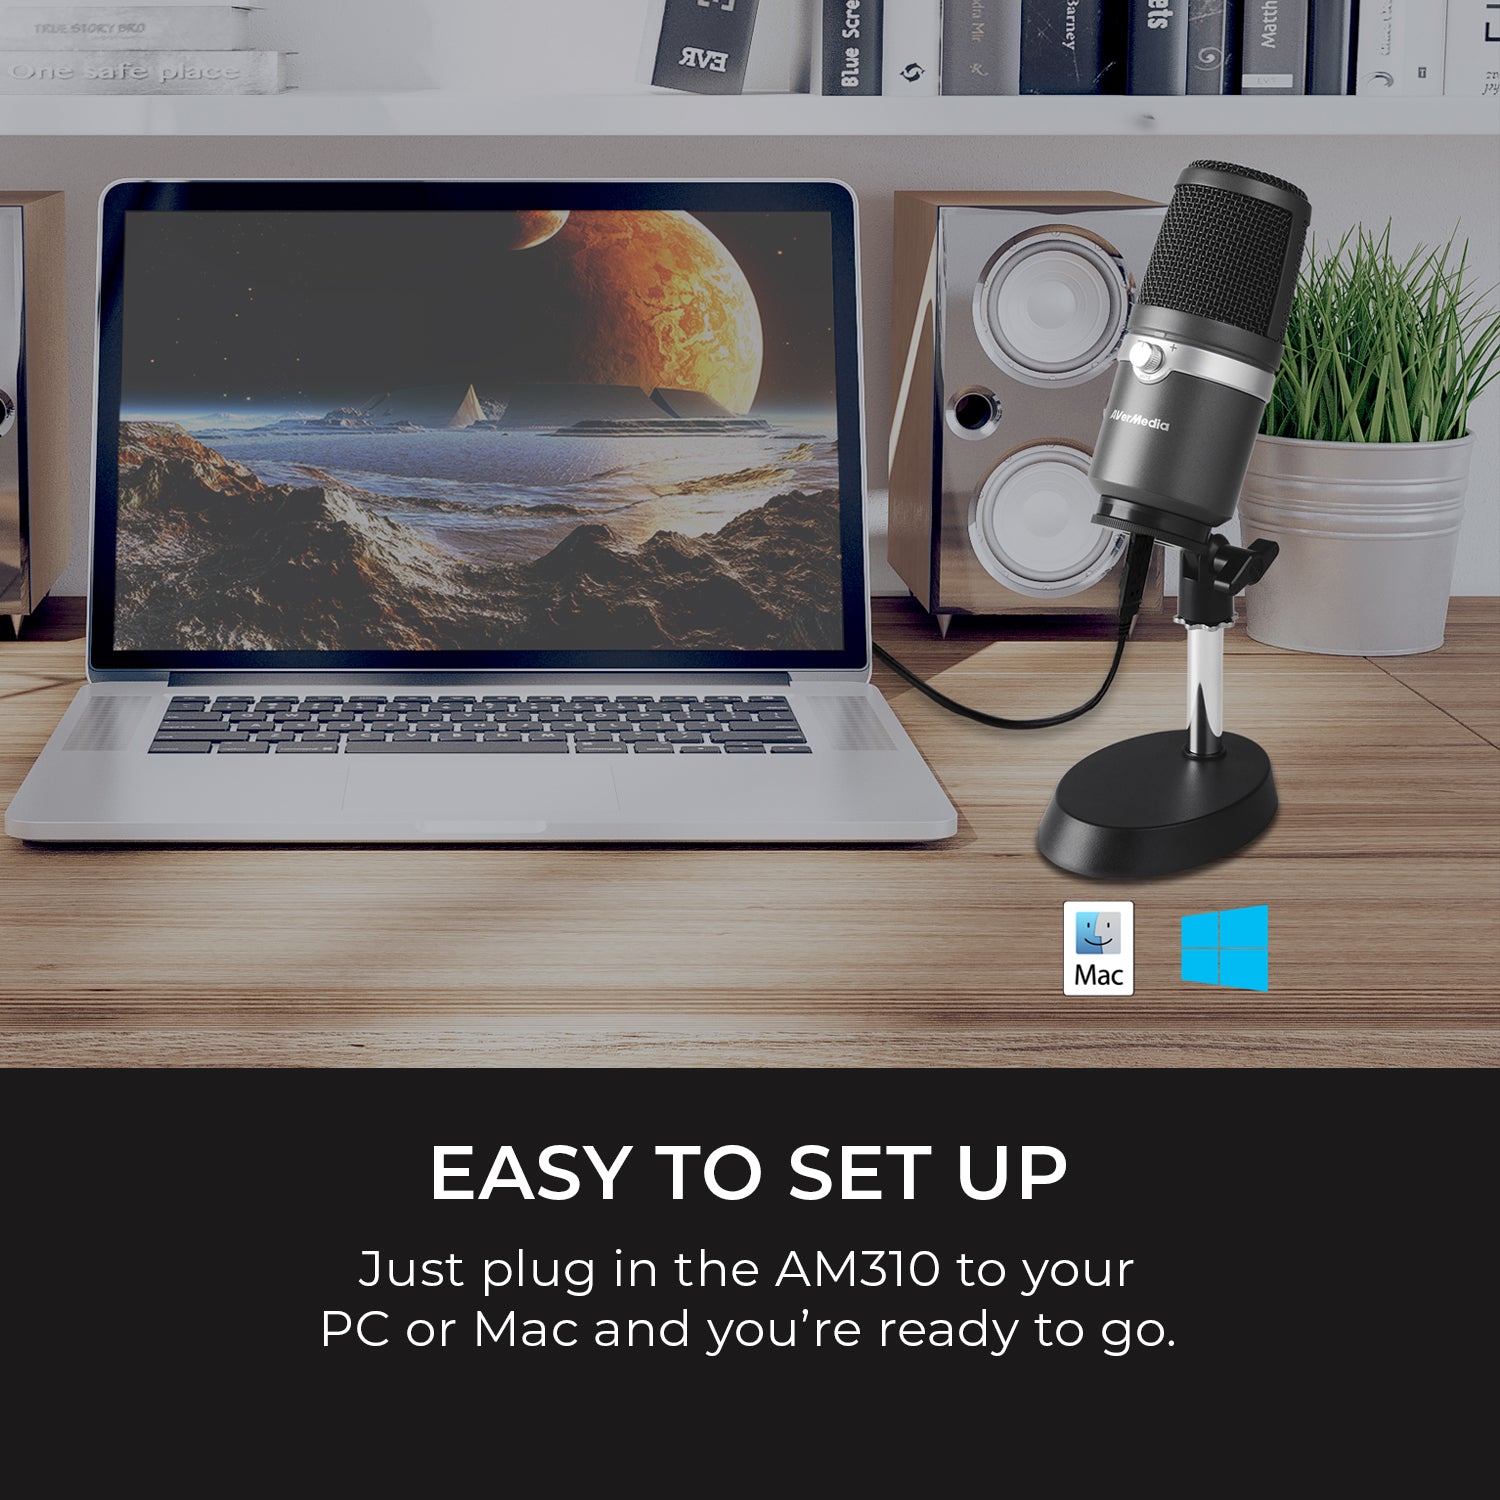 Easy to set up: Just plug in the AM310 to your PC or Mac and you're ready to go.